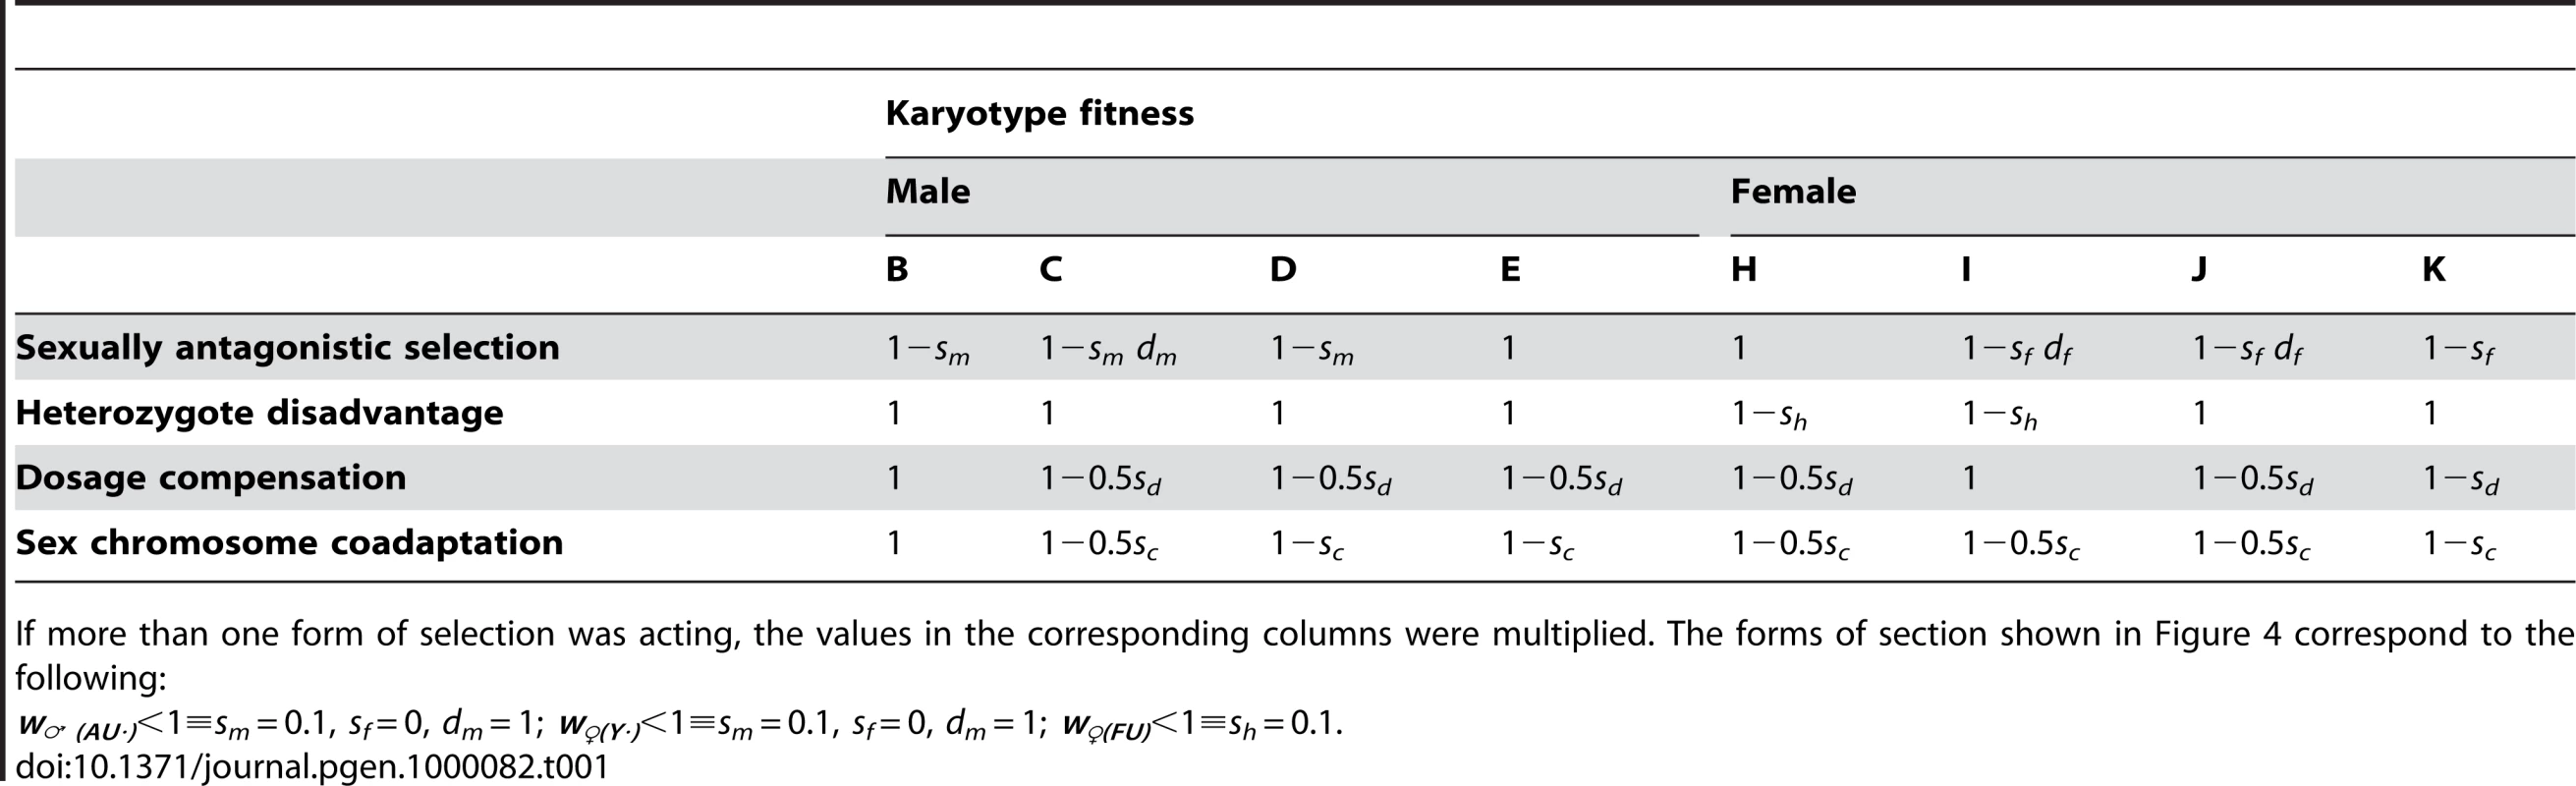 The finesses of the karyotypes under different forms of selection.